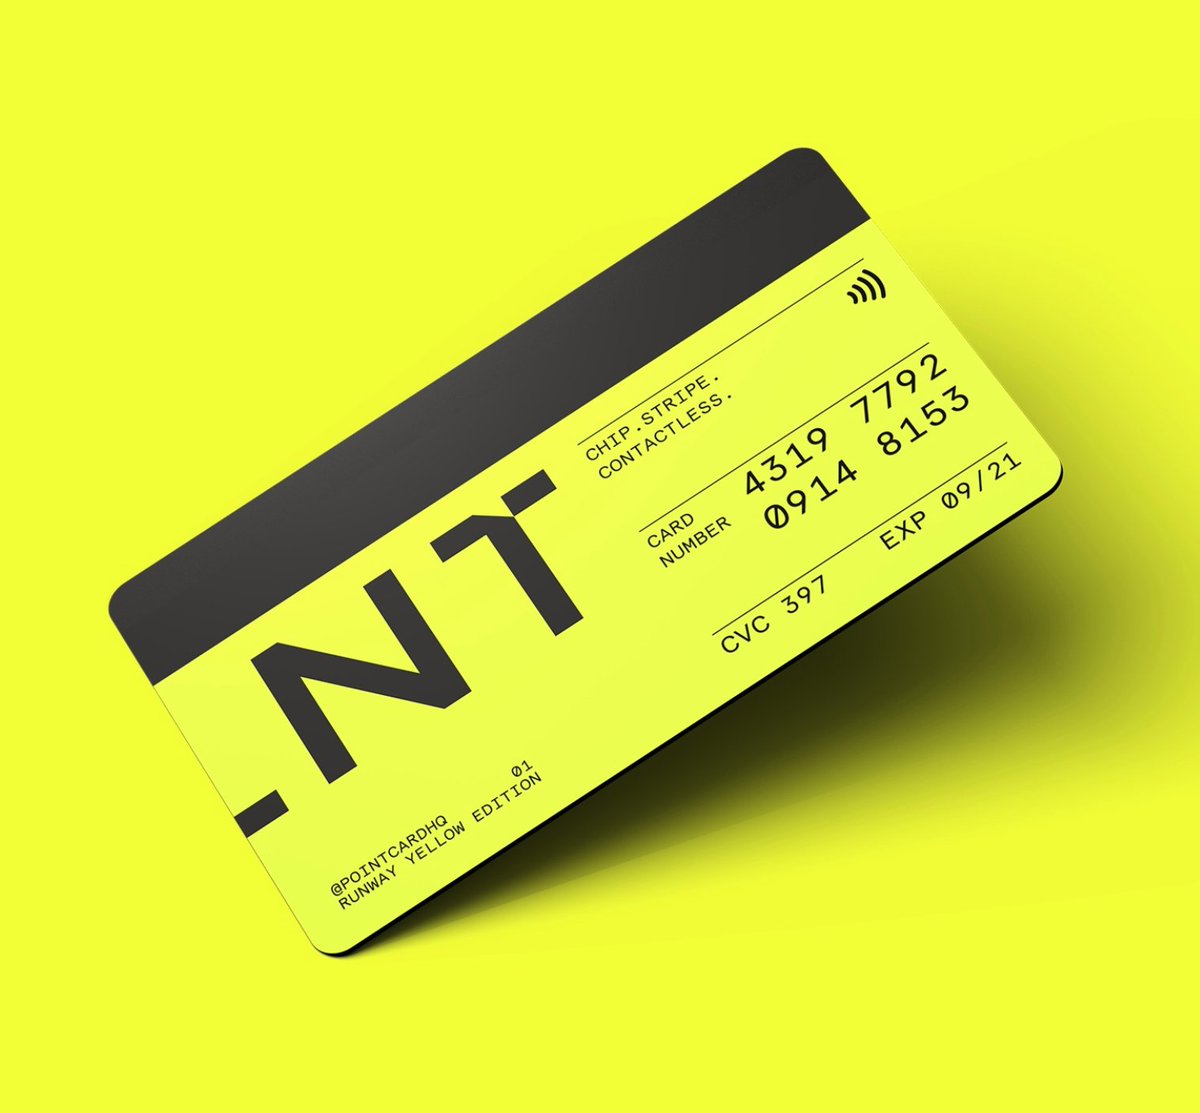 Julian Lehr On Twitter List Of Well Designed Credit Cards N26 Transparent Pointcardhq Runway Yellow Cashapp Glow In The Dark Applecard Titanium I M Writing A Blog Post About Card